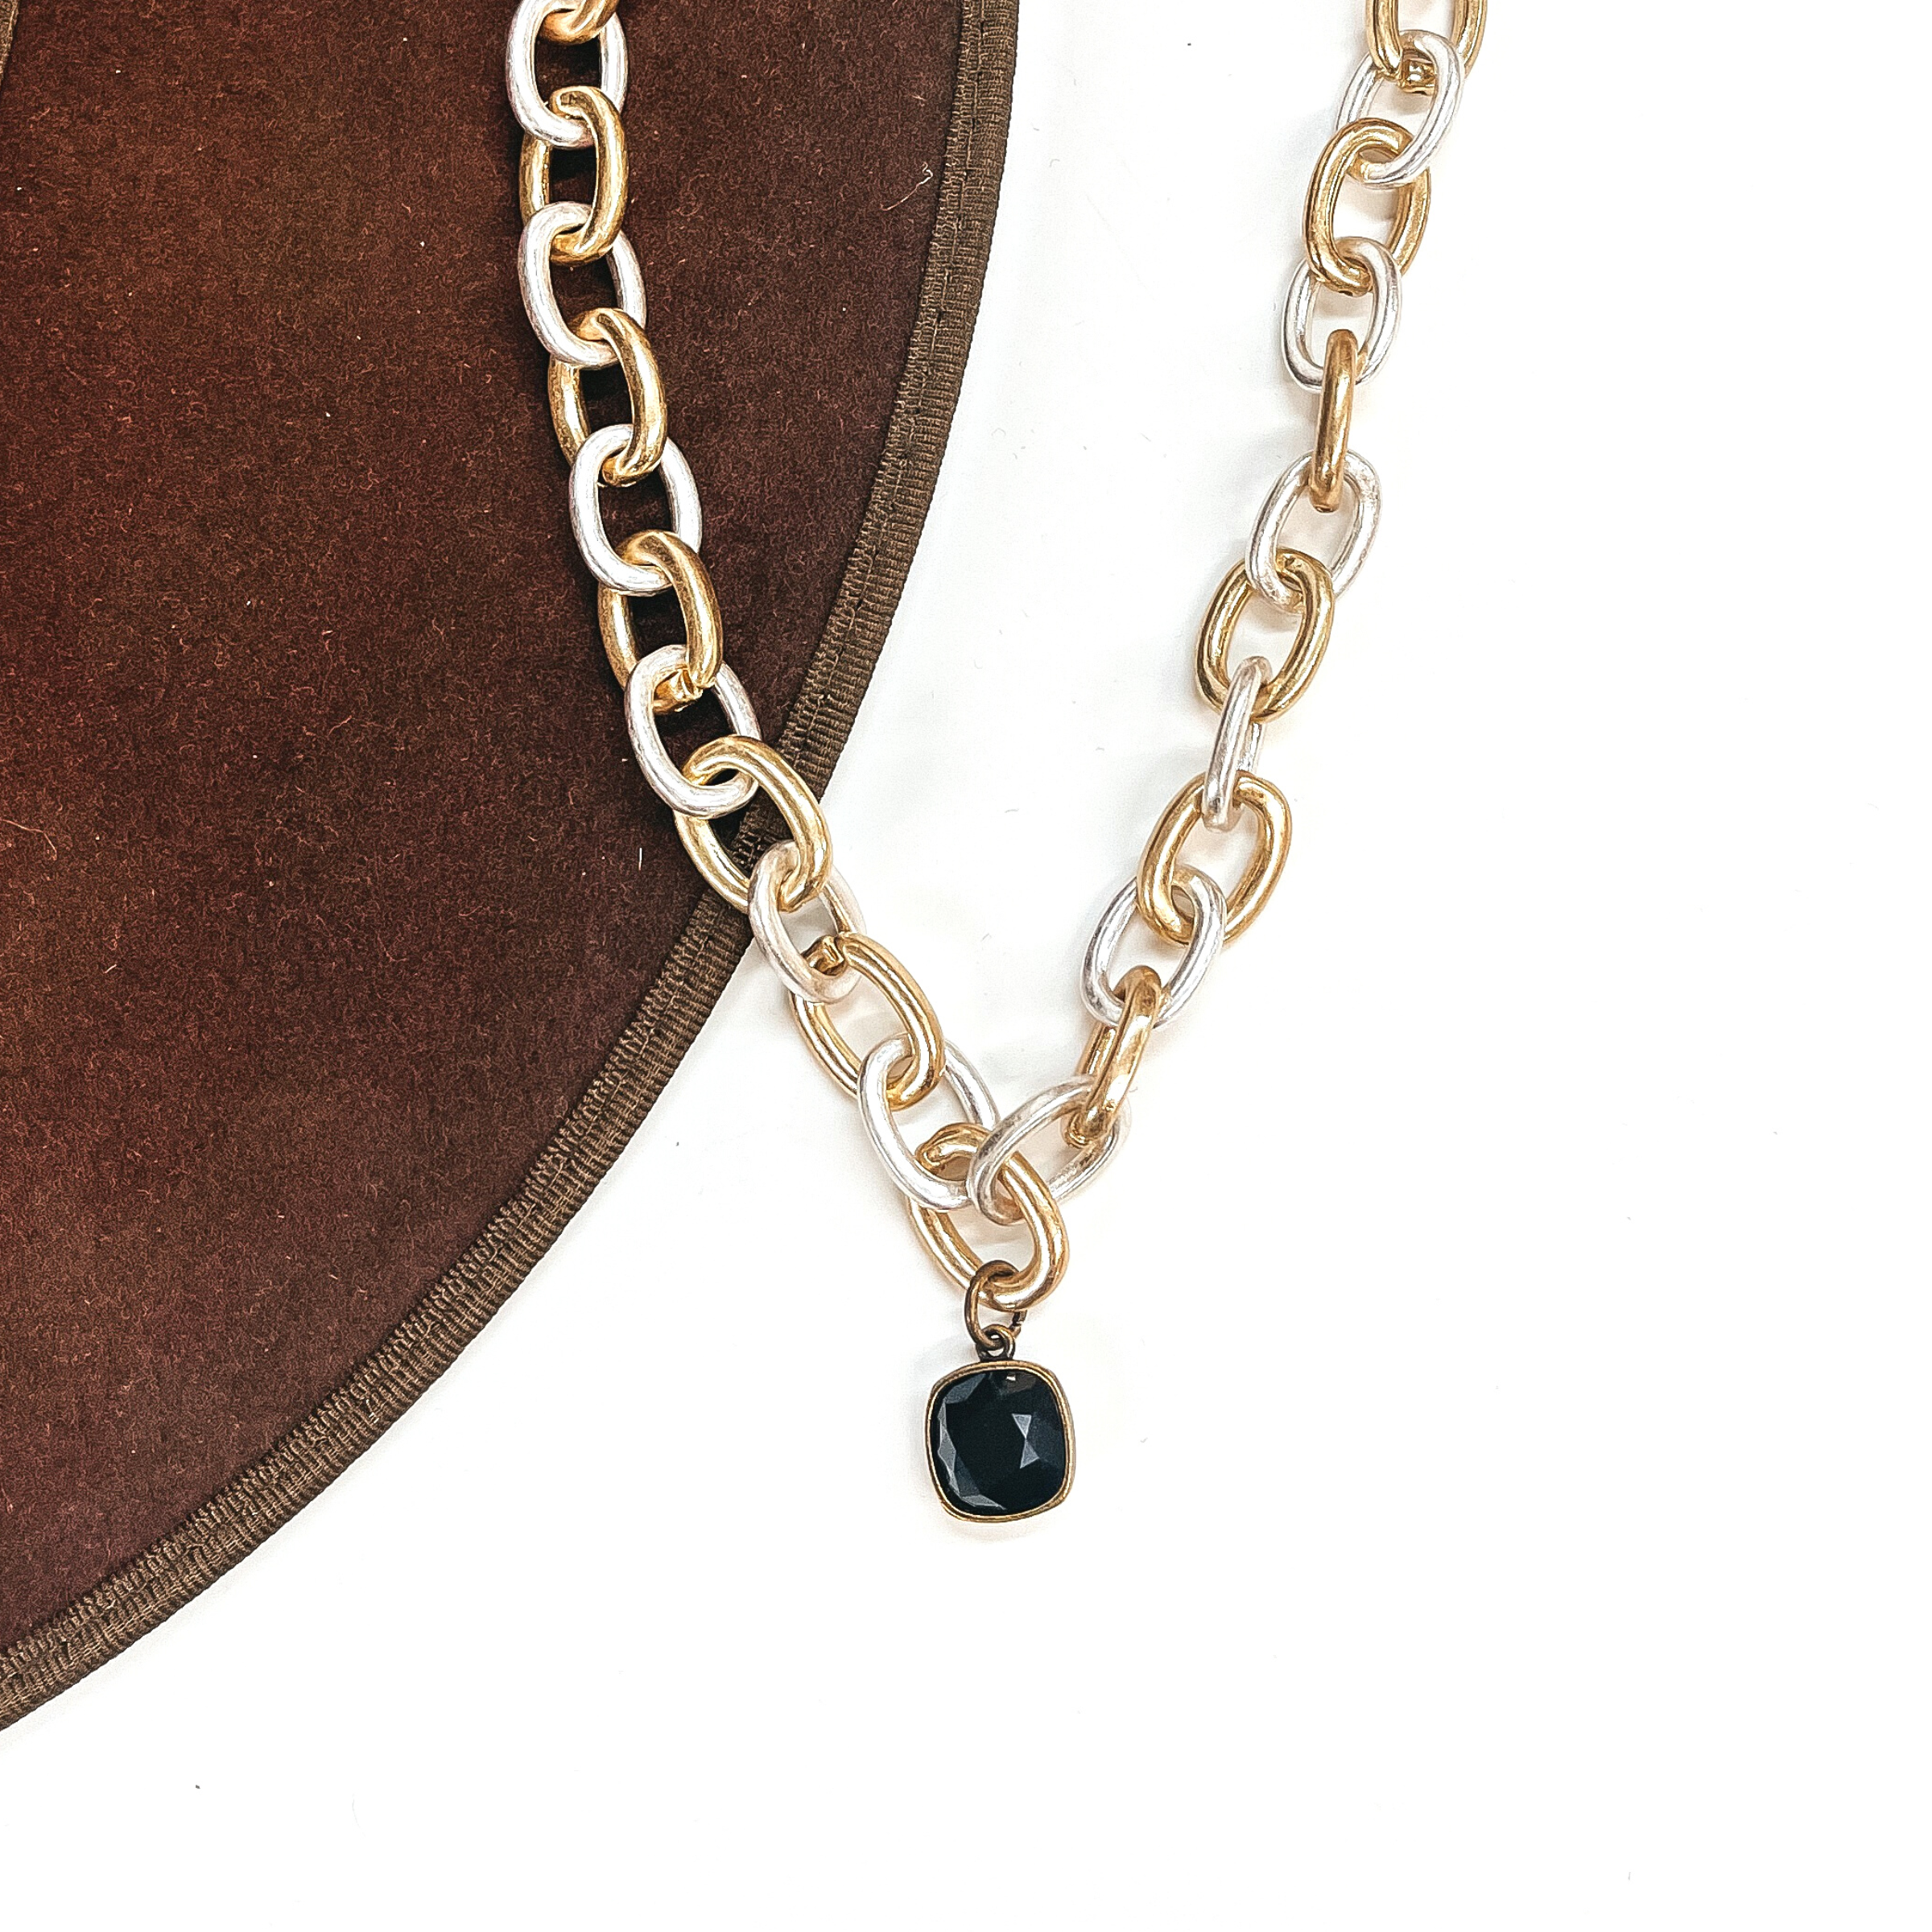 This is silver and gold tone thick linked chain necklace with a black cushion cut crystal  charm in a bronze setting. This necklace is taken laying on a dark brown hat brim  and on a white background.